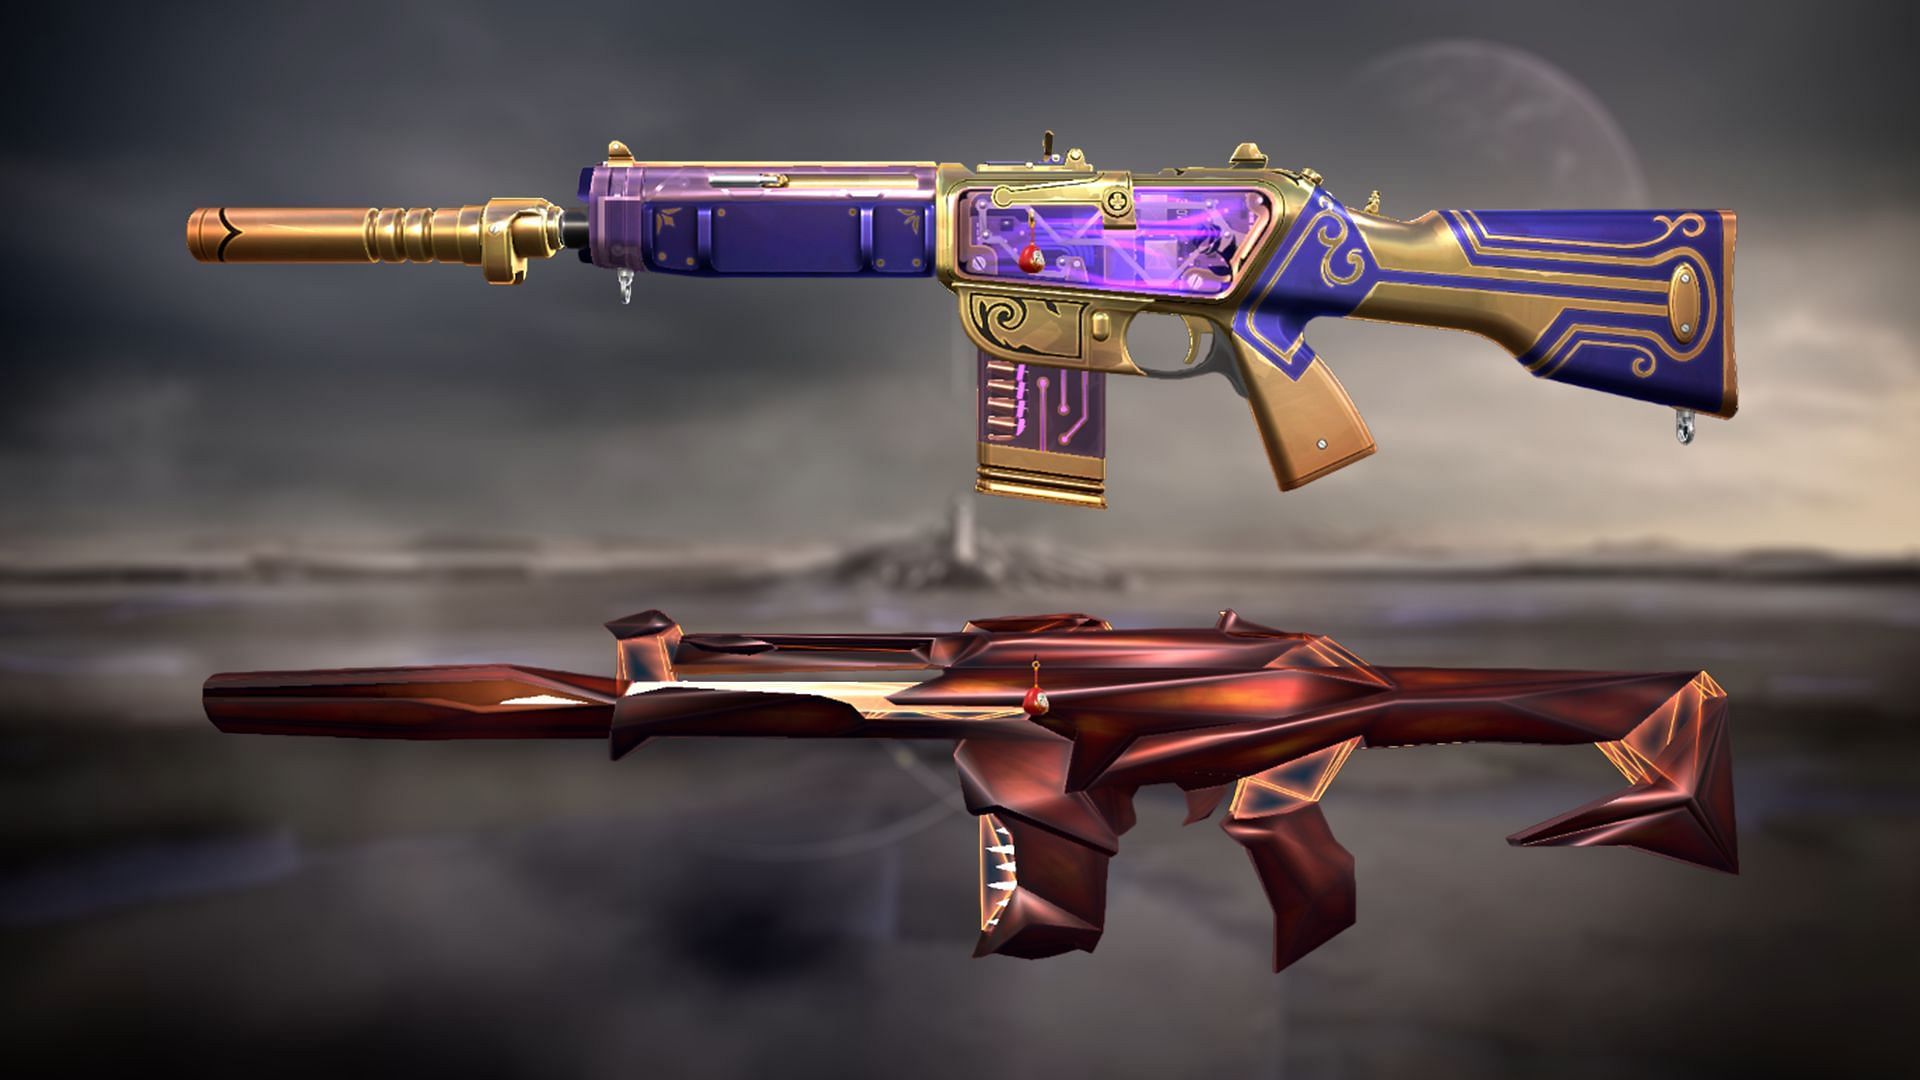 The Phantom skins with the best reload animations in Valorant (Image via Sportskeeda)